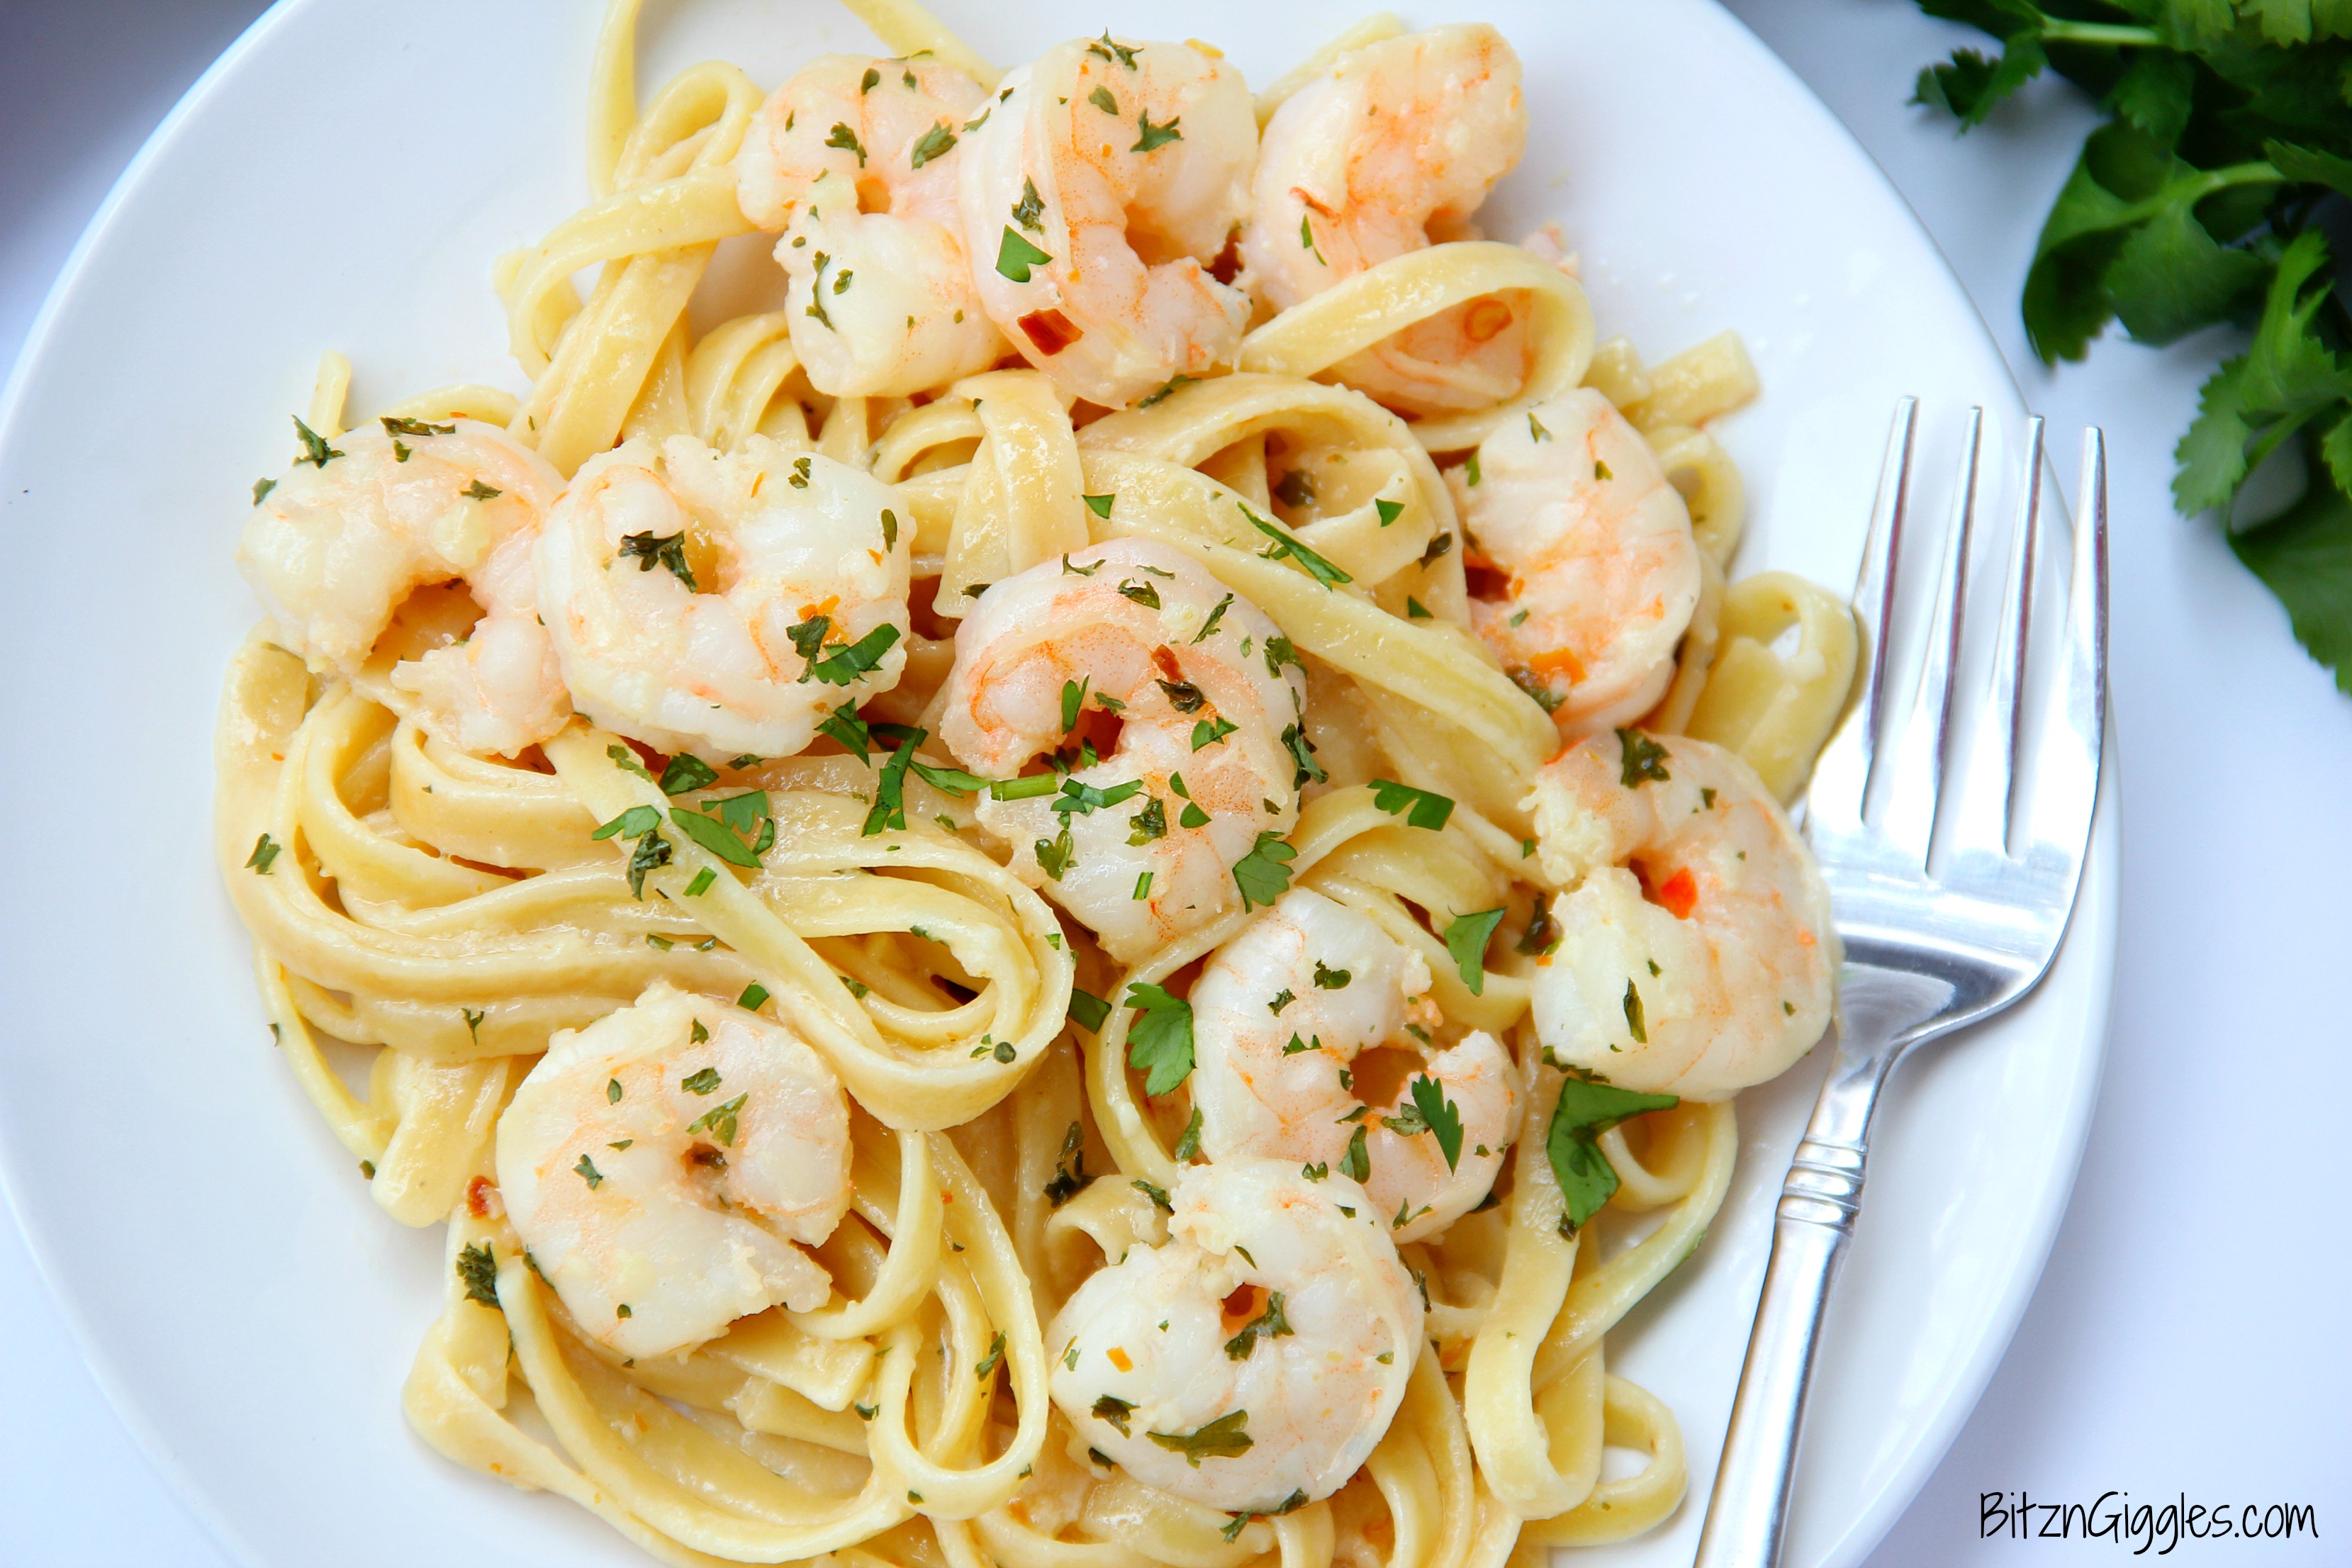 Lemon Garlic Fettuccine - lemon, garlic and red pepper flakes bring a punch of flavor to this quick and easy shrimp pasta recipe!